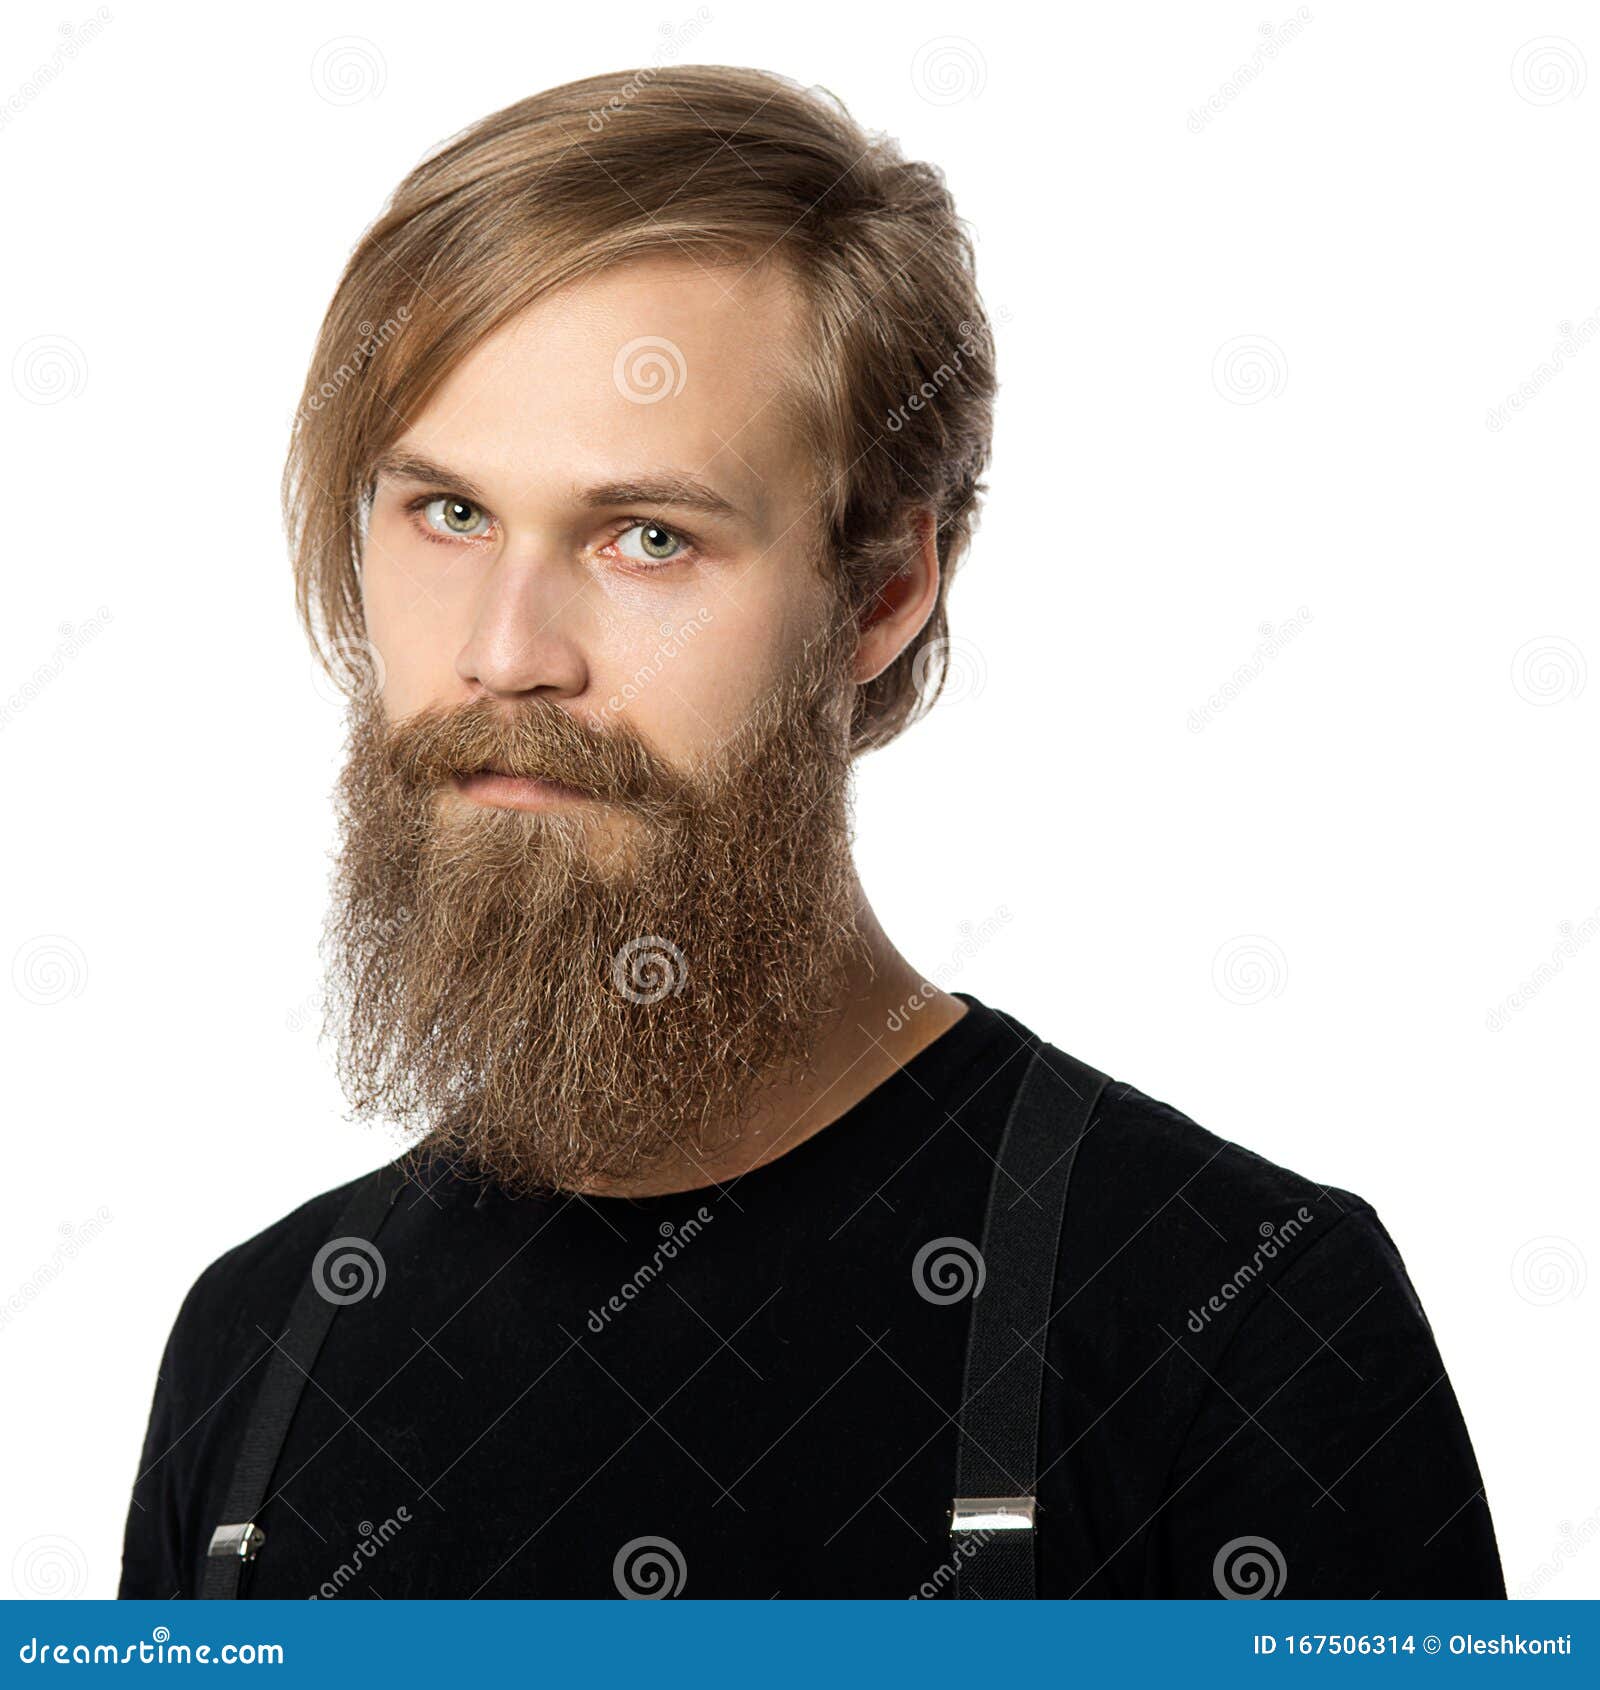 The Attractive Man the Blonde with Long Hair of the European Appearance  with a Beard in a Black T-shirt and Black Trousers on a Stock Photo - Image  of background, attractive: 167506314